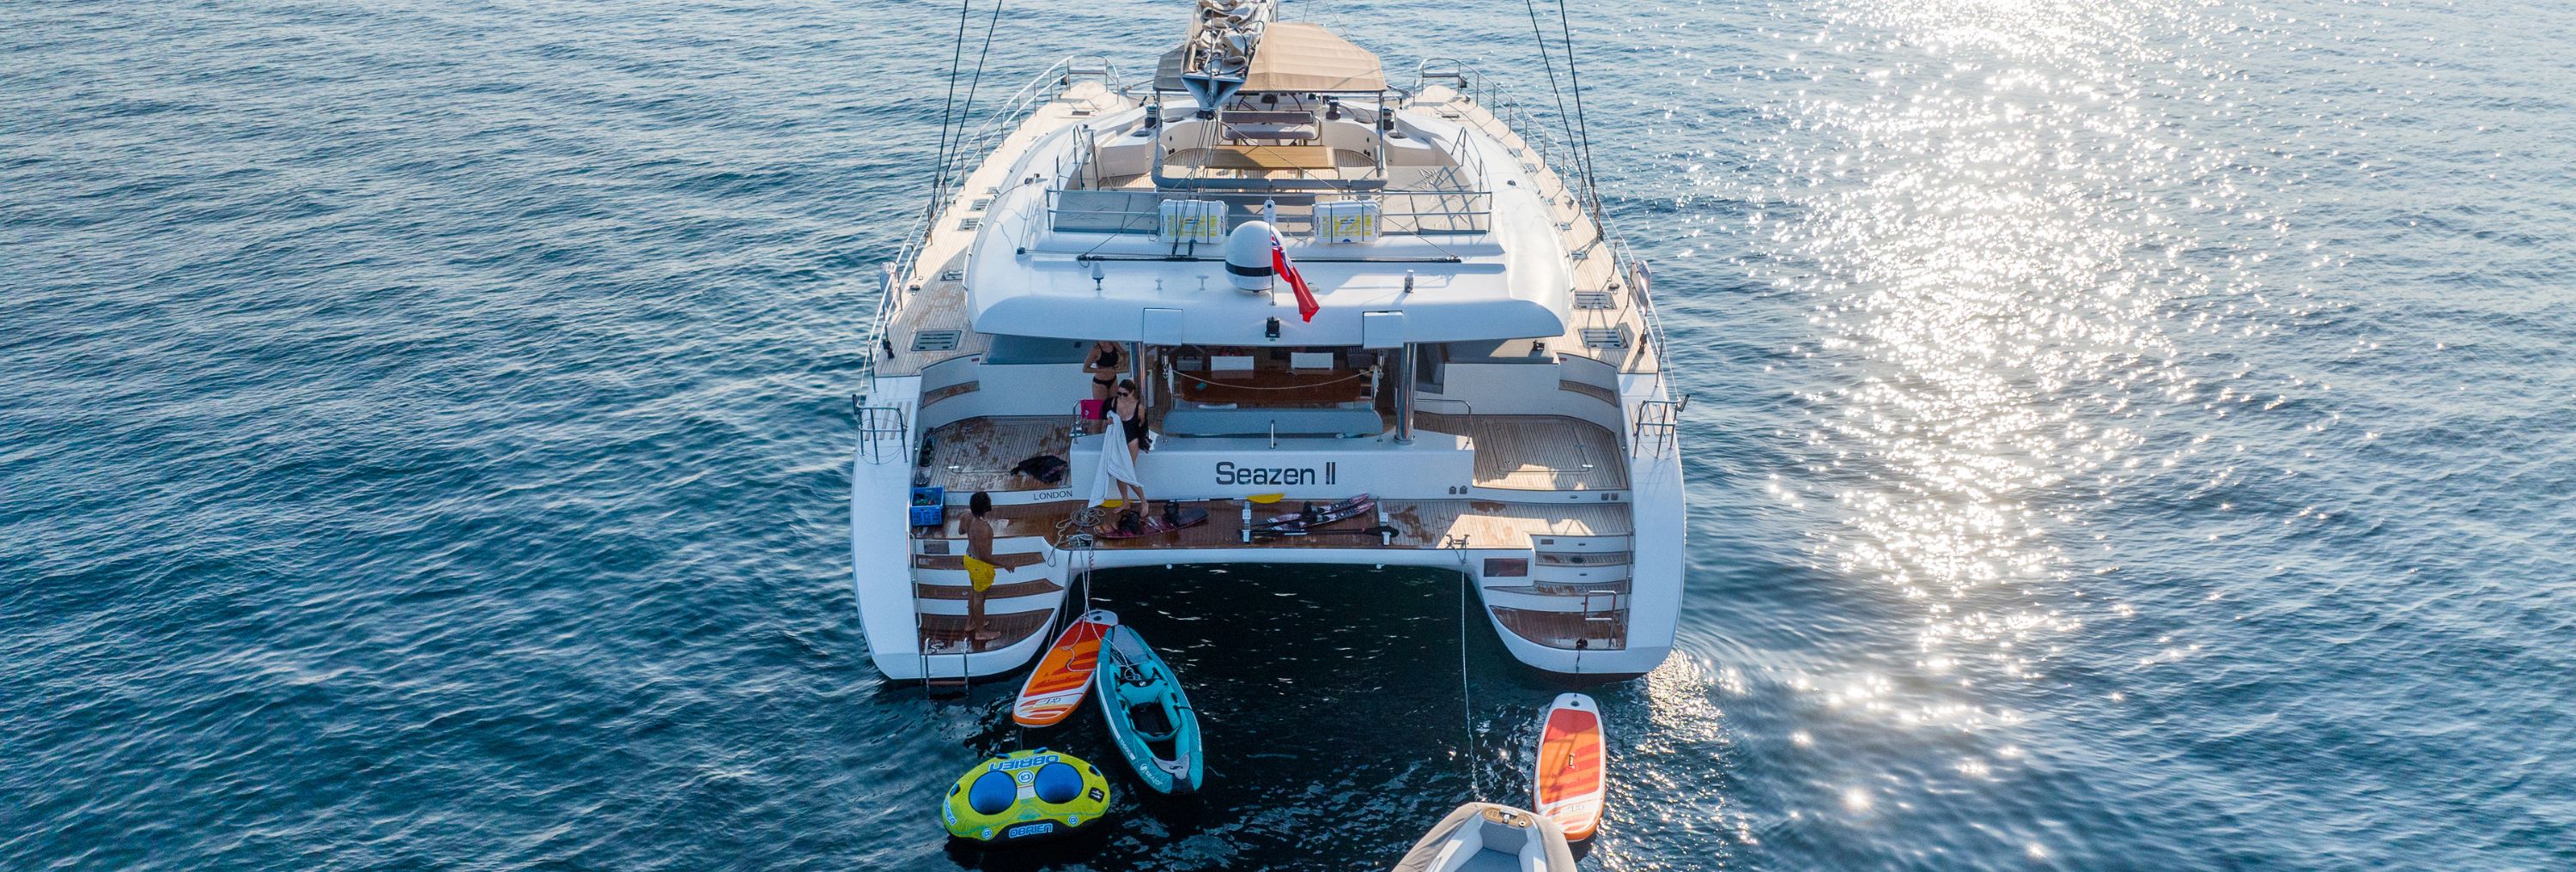 SEAZEN II: Last Minute Day Charters in the French Riviera